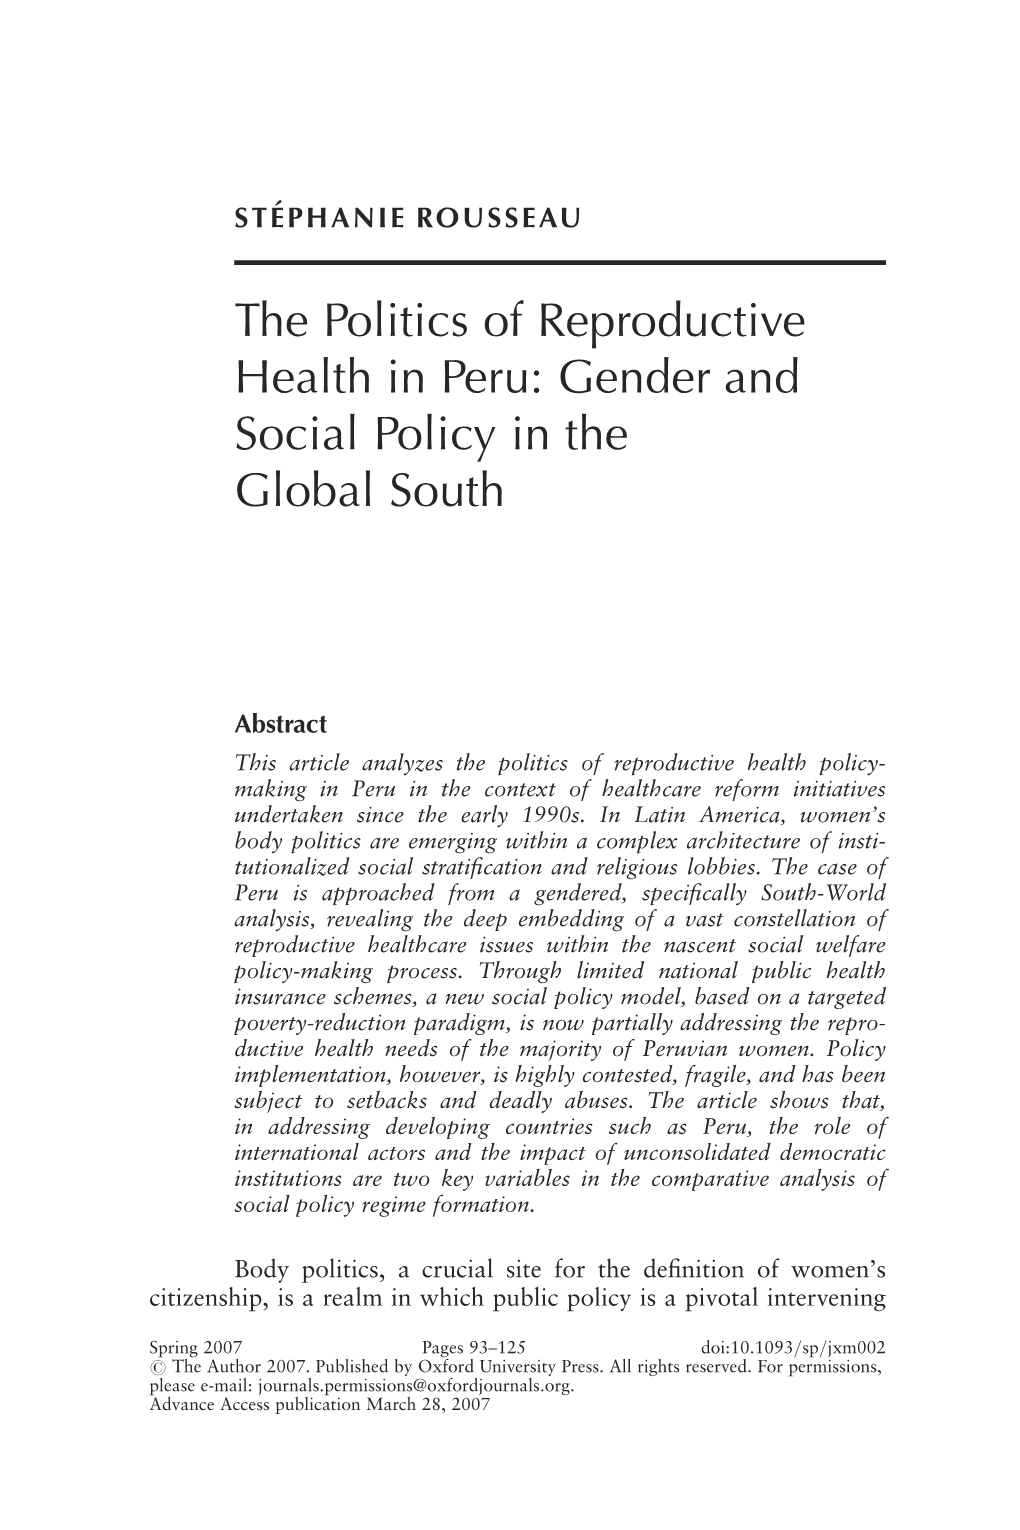 The Politics of Reproductive Health in Peru: Gender and Social Policy in the Global South